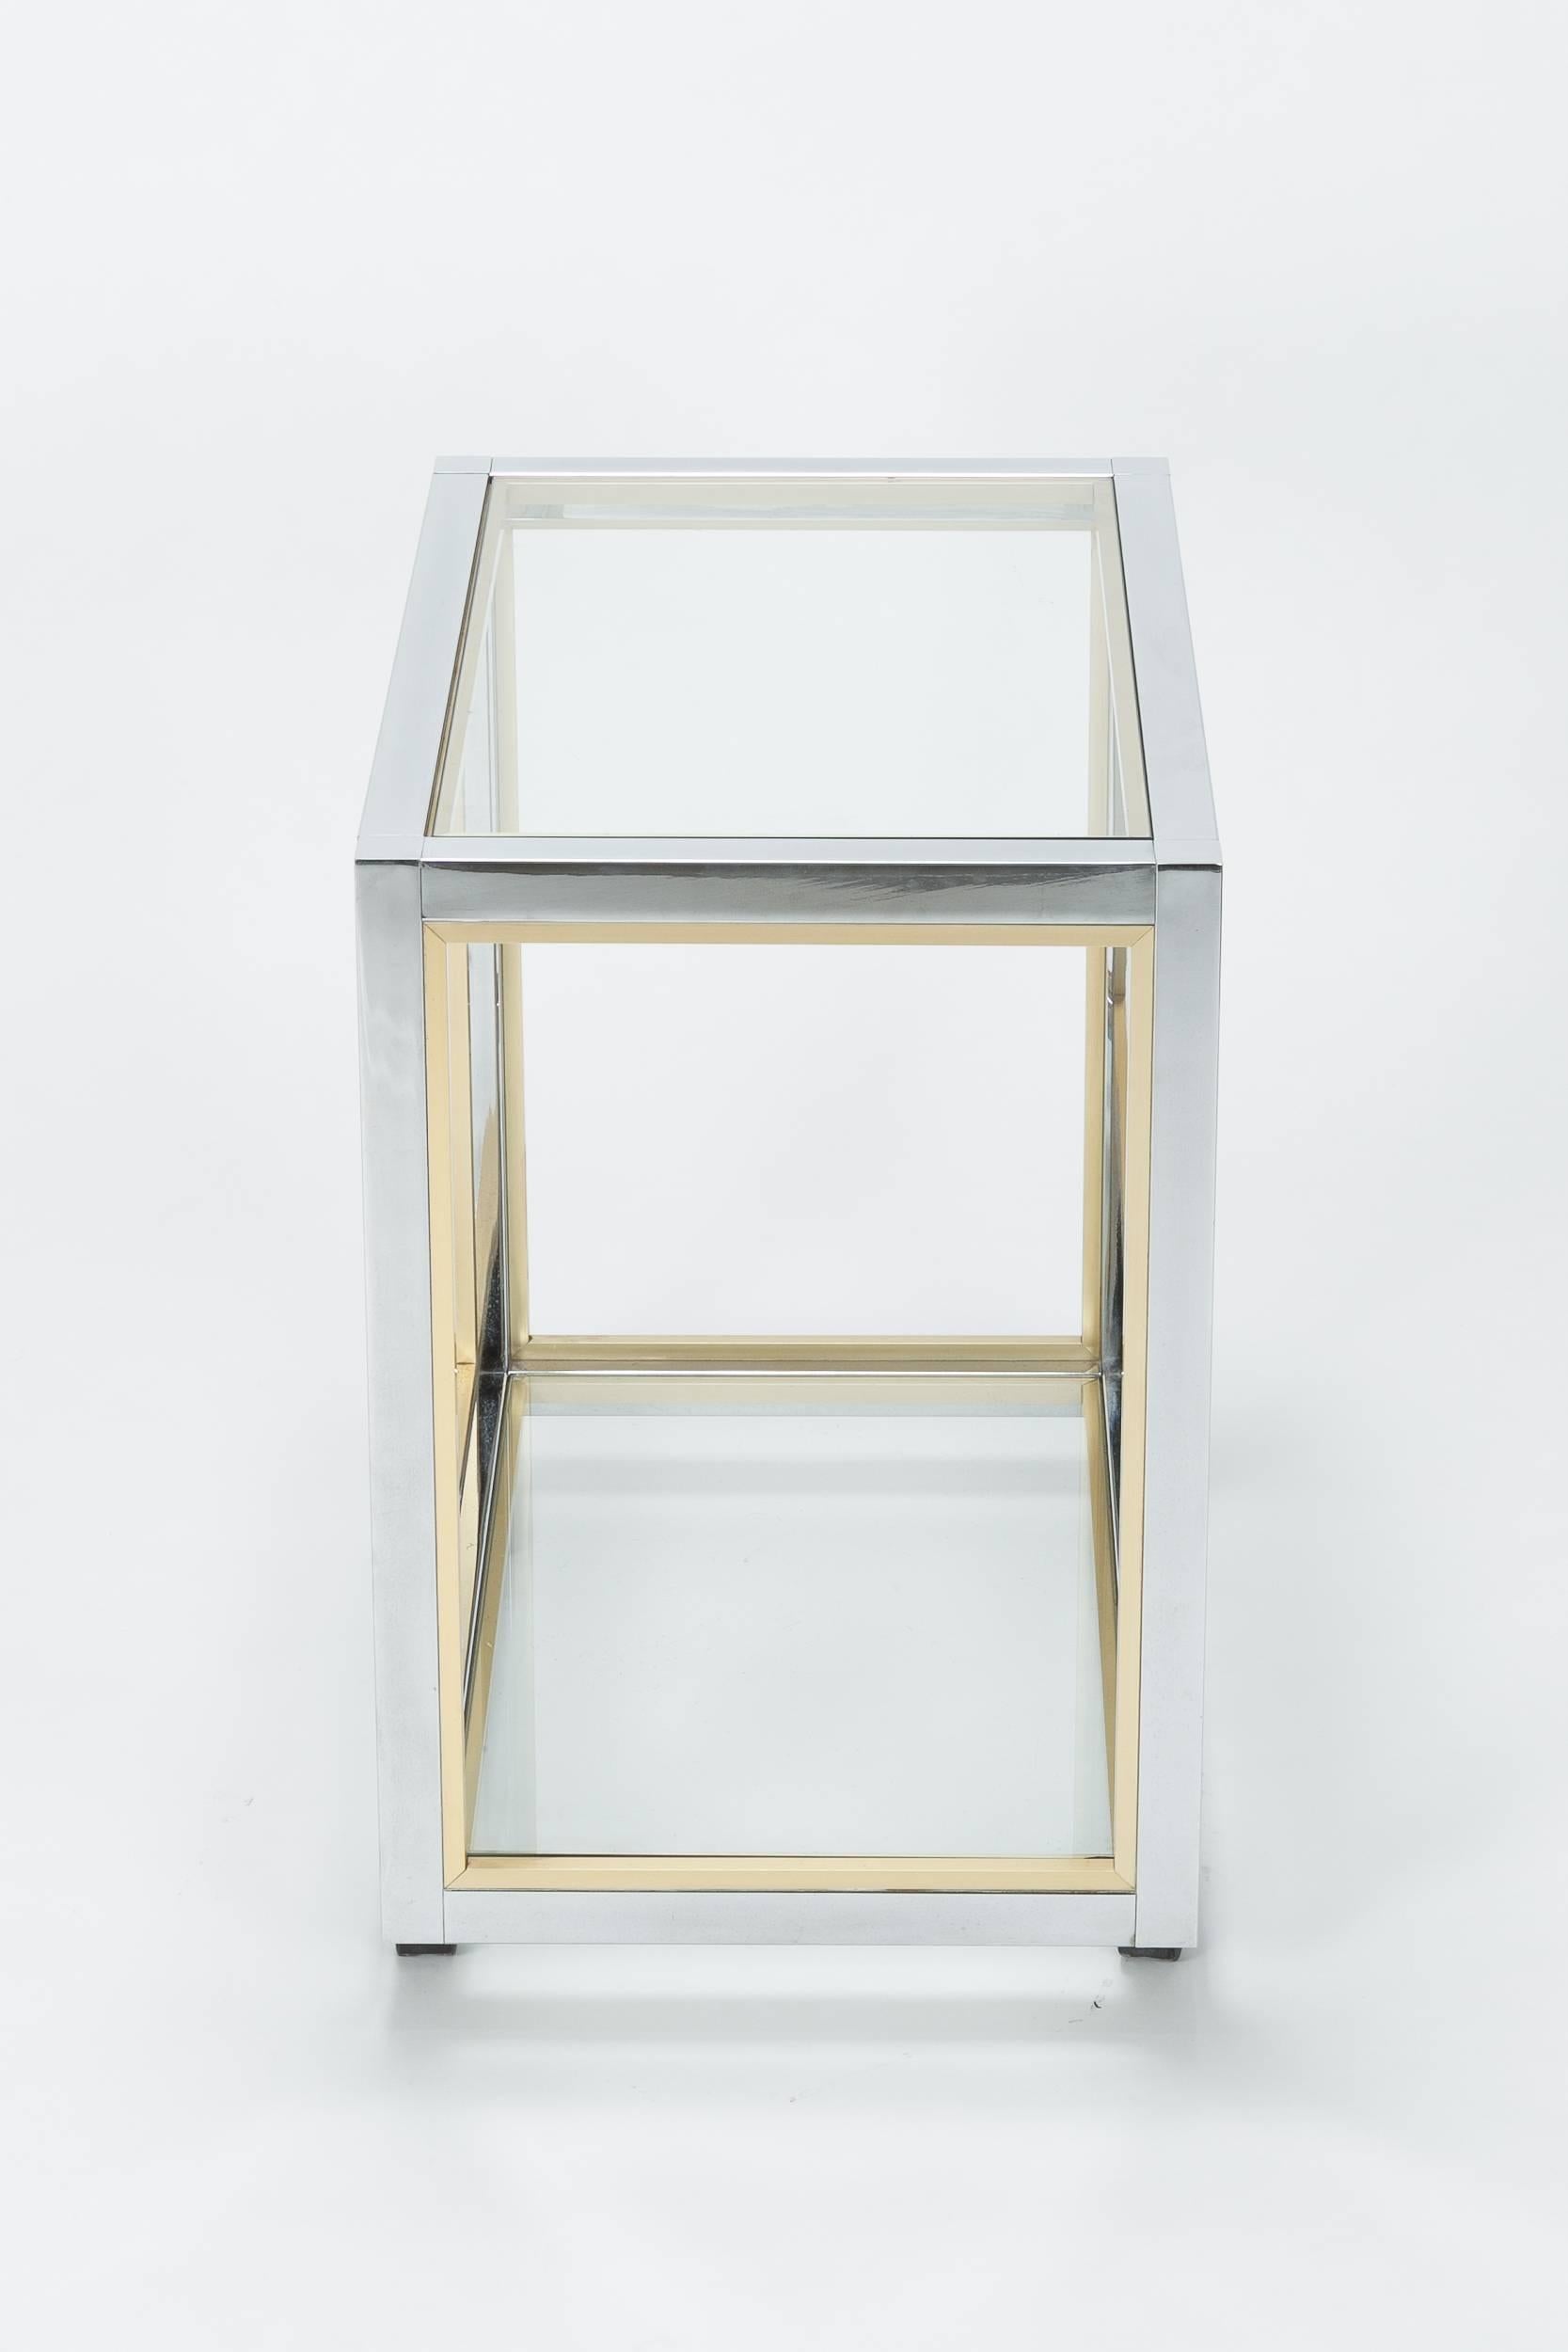 Renato Zevi bar cart designed for his own manufacture Zevi & C. in Italy in the 1970s. High quality craftsmanship made of solid brass and chromed metal, shelves are made of glass. Original manufacturers sticker underneath.